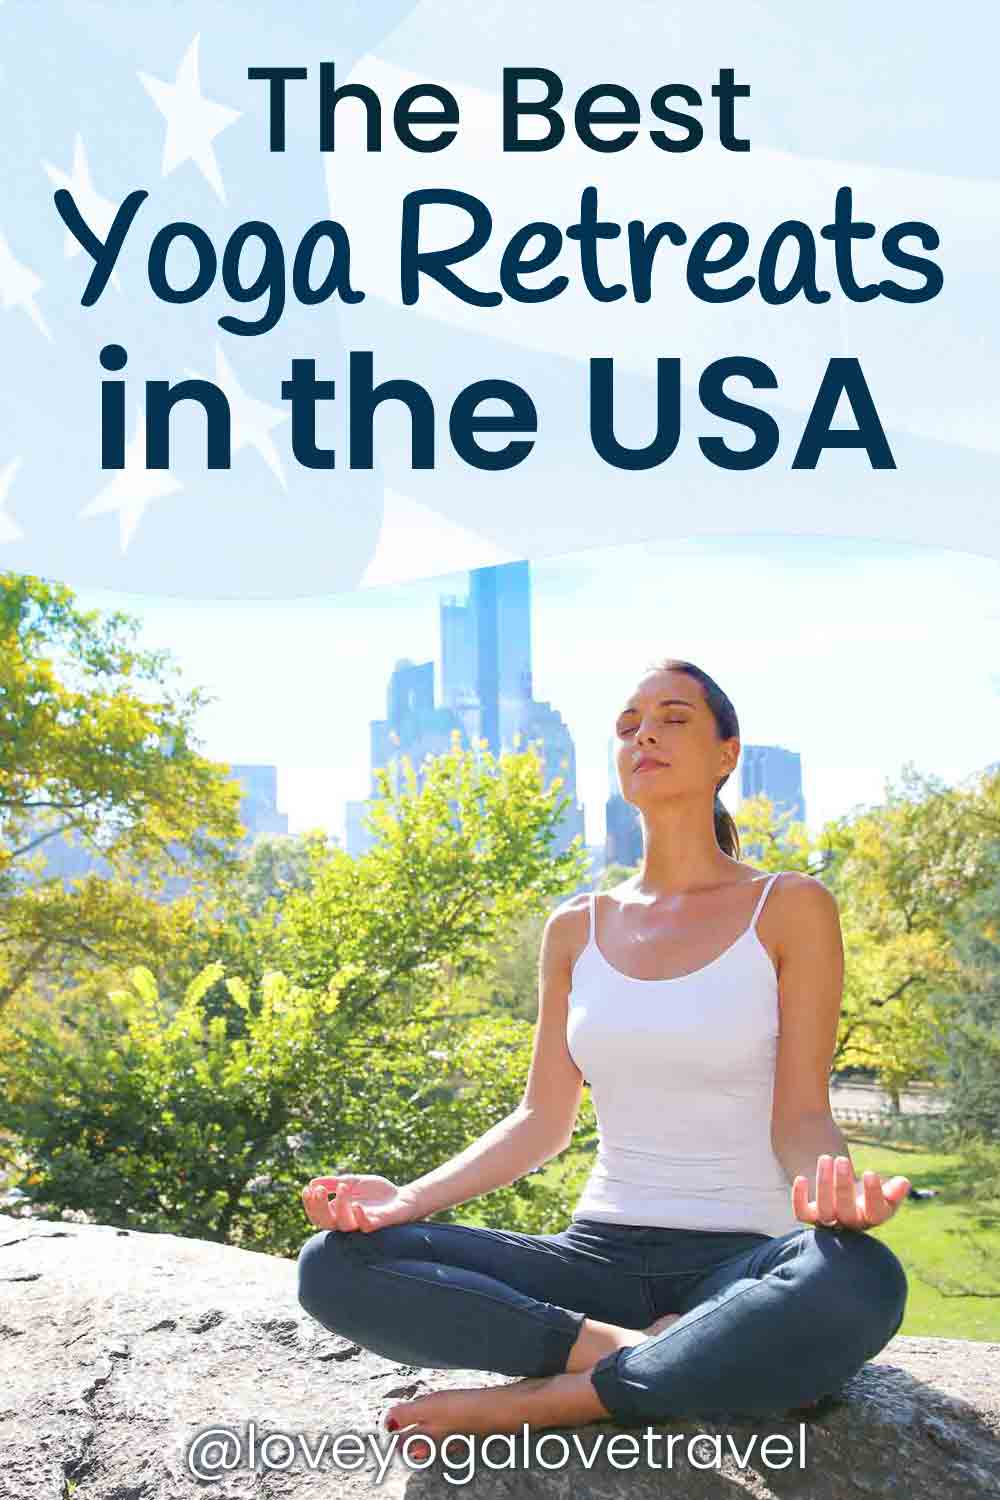 Pin Me! The Best Yoga Retreats in the USA